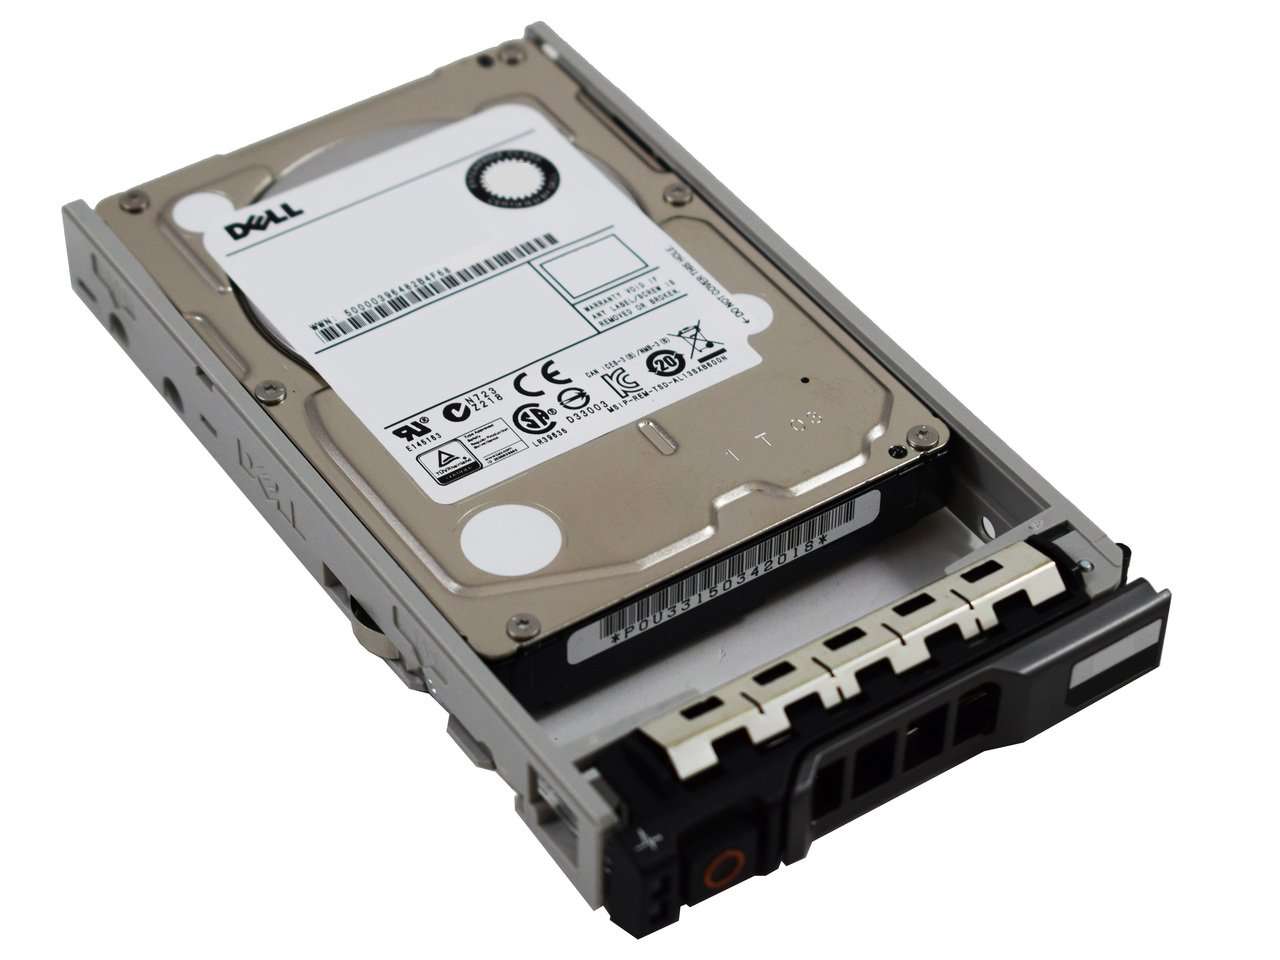 Dell G13 342-3028 600GB 10K RPM SAS 6Gb/s 512n 2.5" Manufacturer Recertified HDD